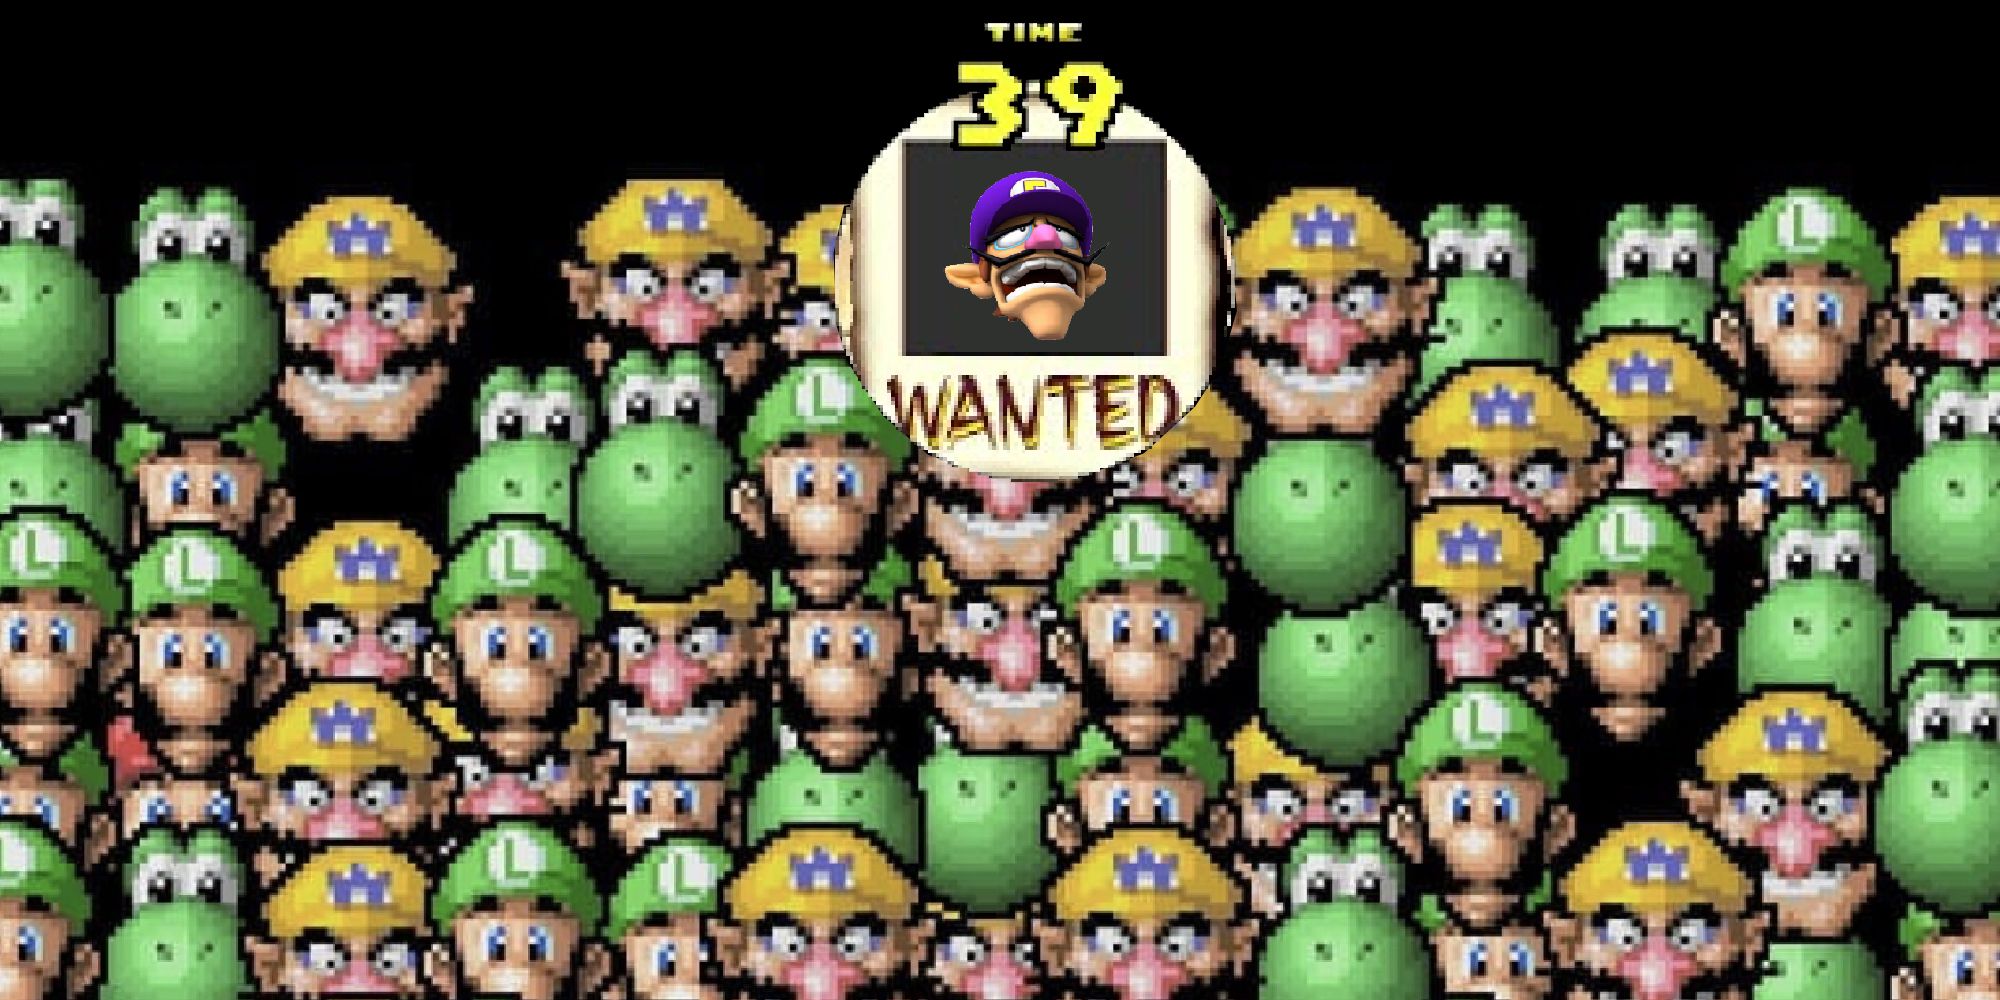 Find Luigi minigame from Mario 64 DS but with Waluigi in the WANTED circle